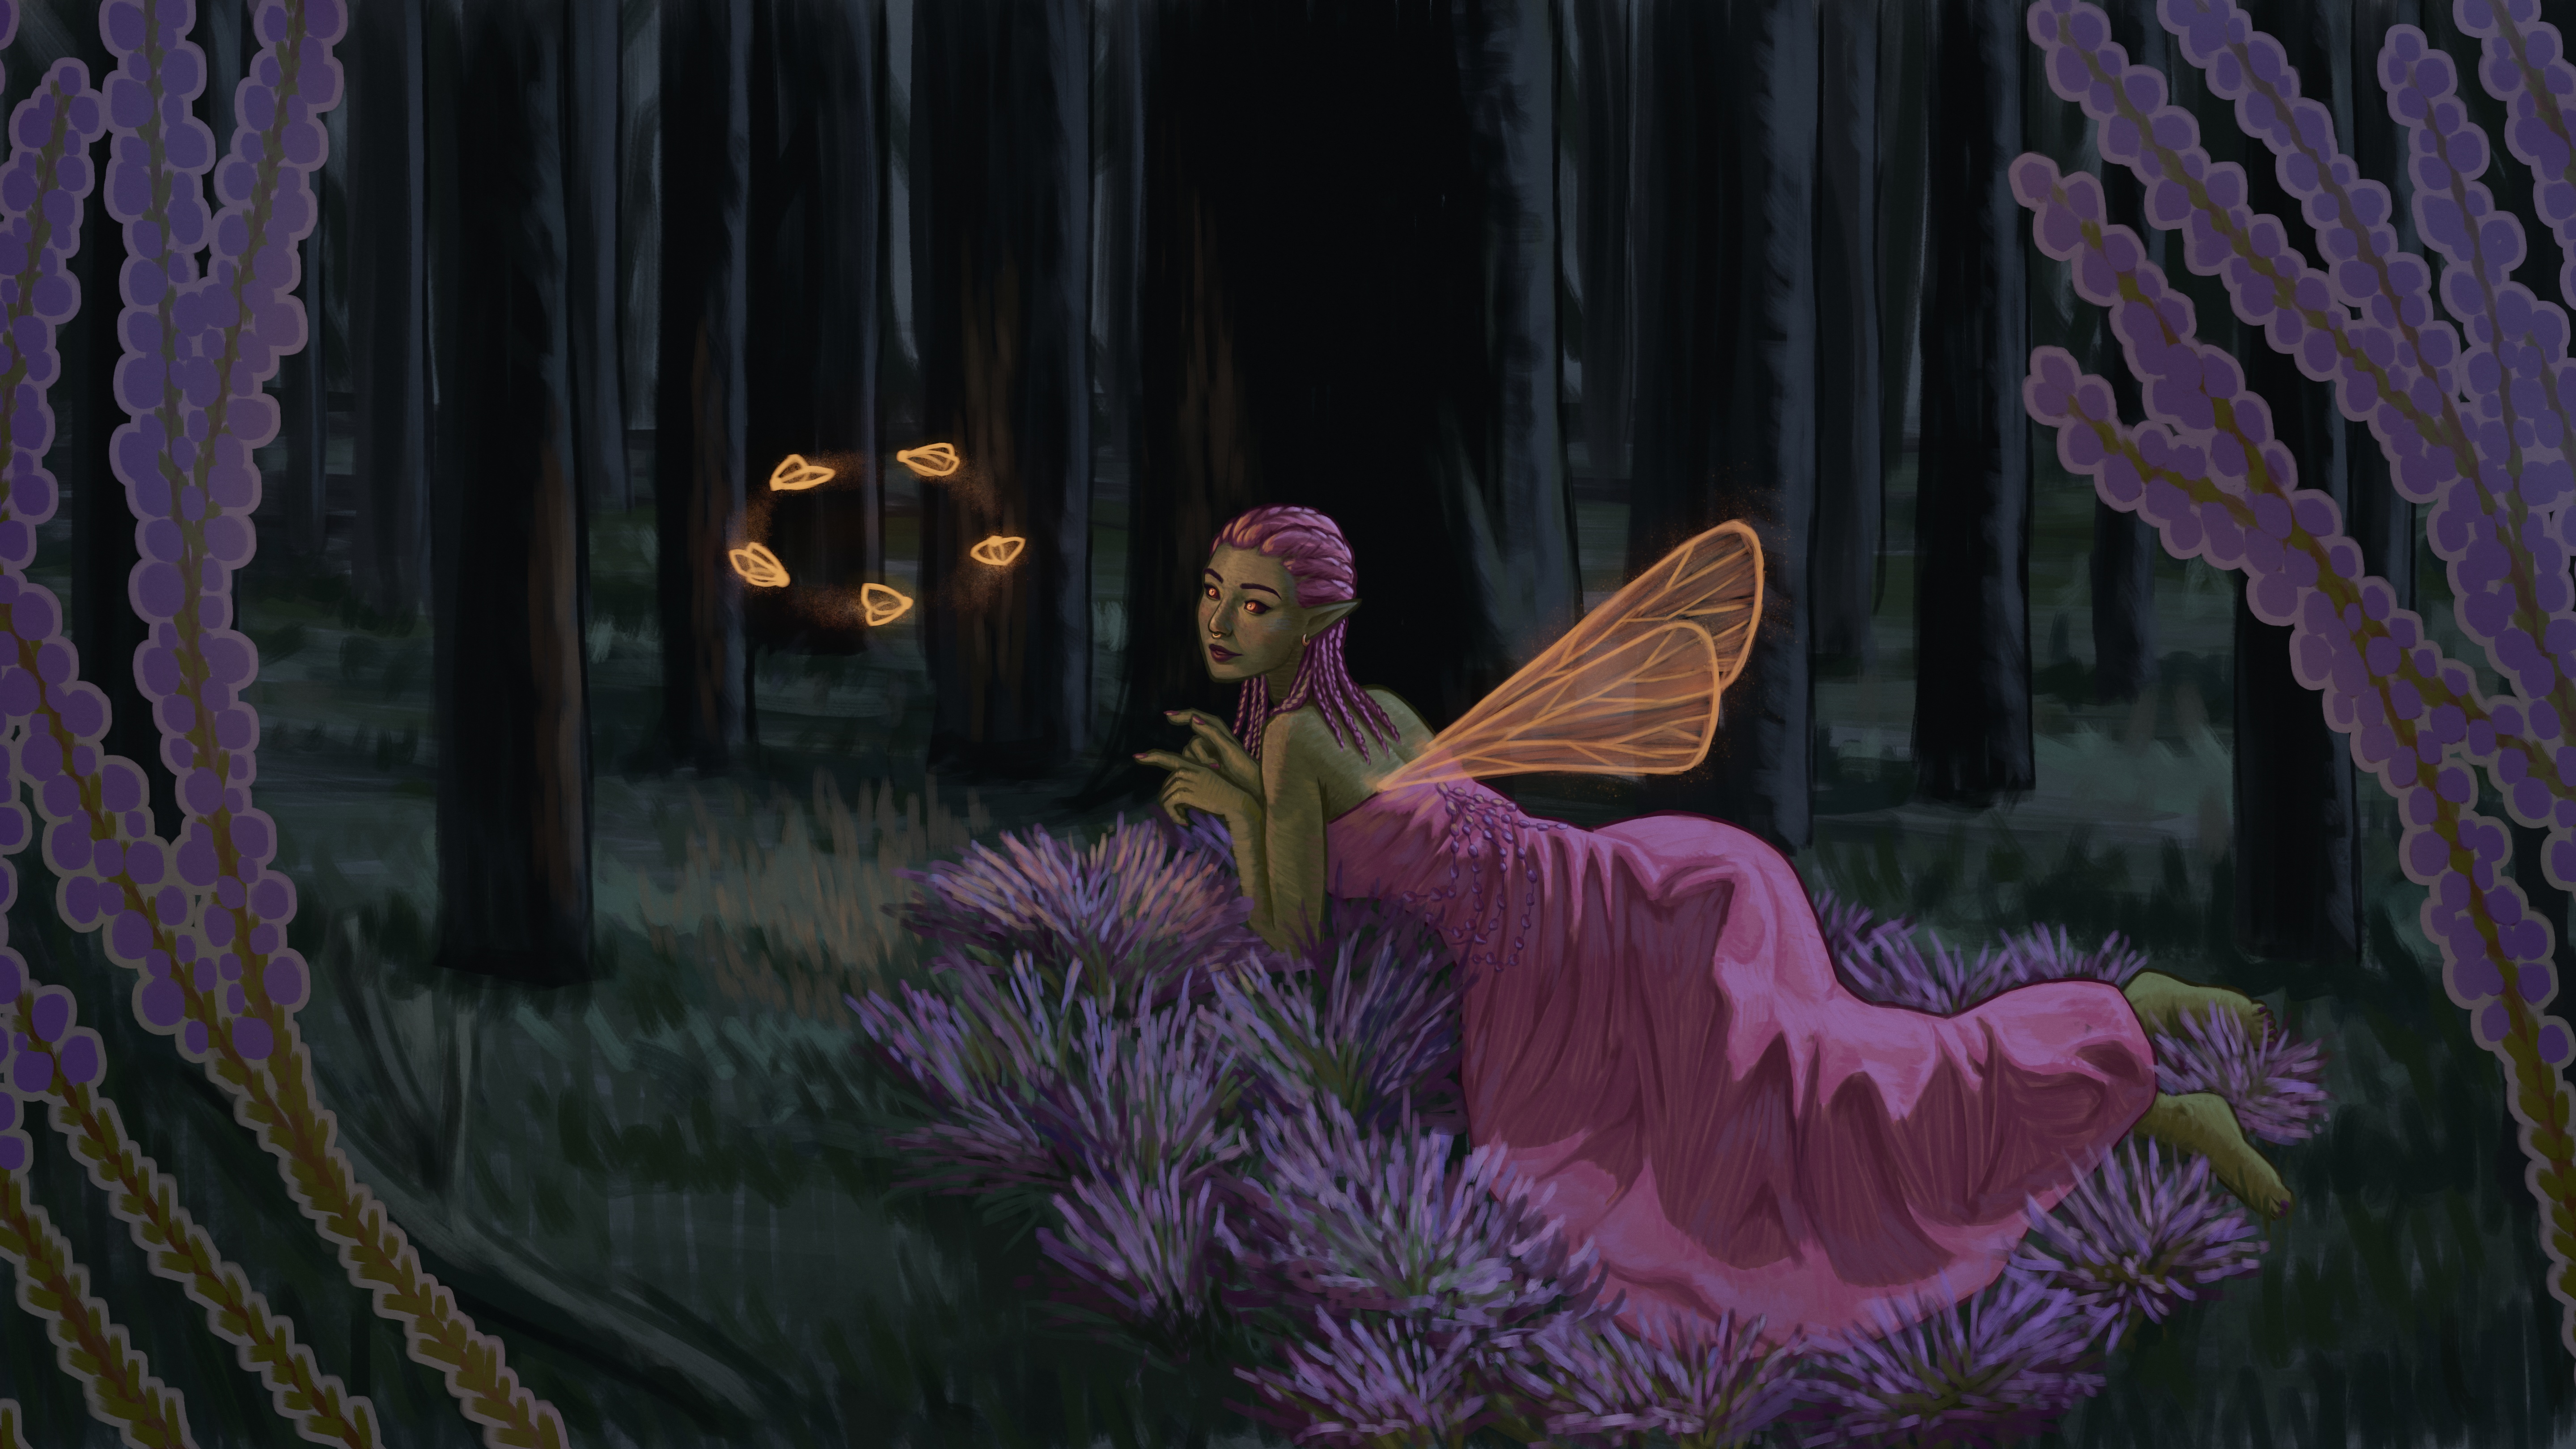 Digital painting of a green-skinned fairy
with purple braided hair and a long pink dress.
She's lying on a bush of heathers in a moonlit forest,
looking at a group of magical glowing moths with a playful expression.
She has wings that resemble those of the moths.